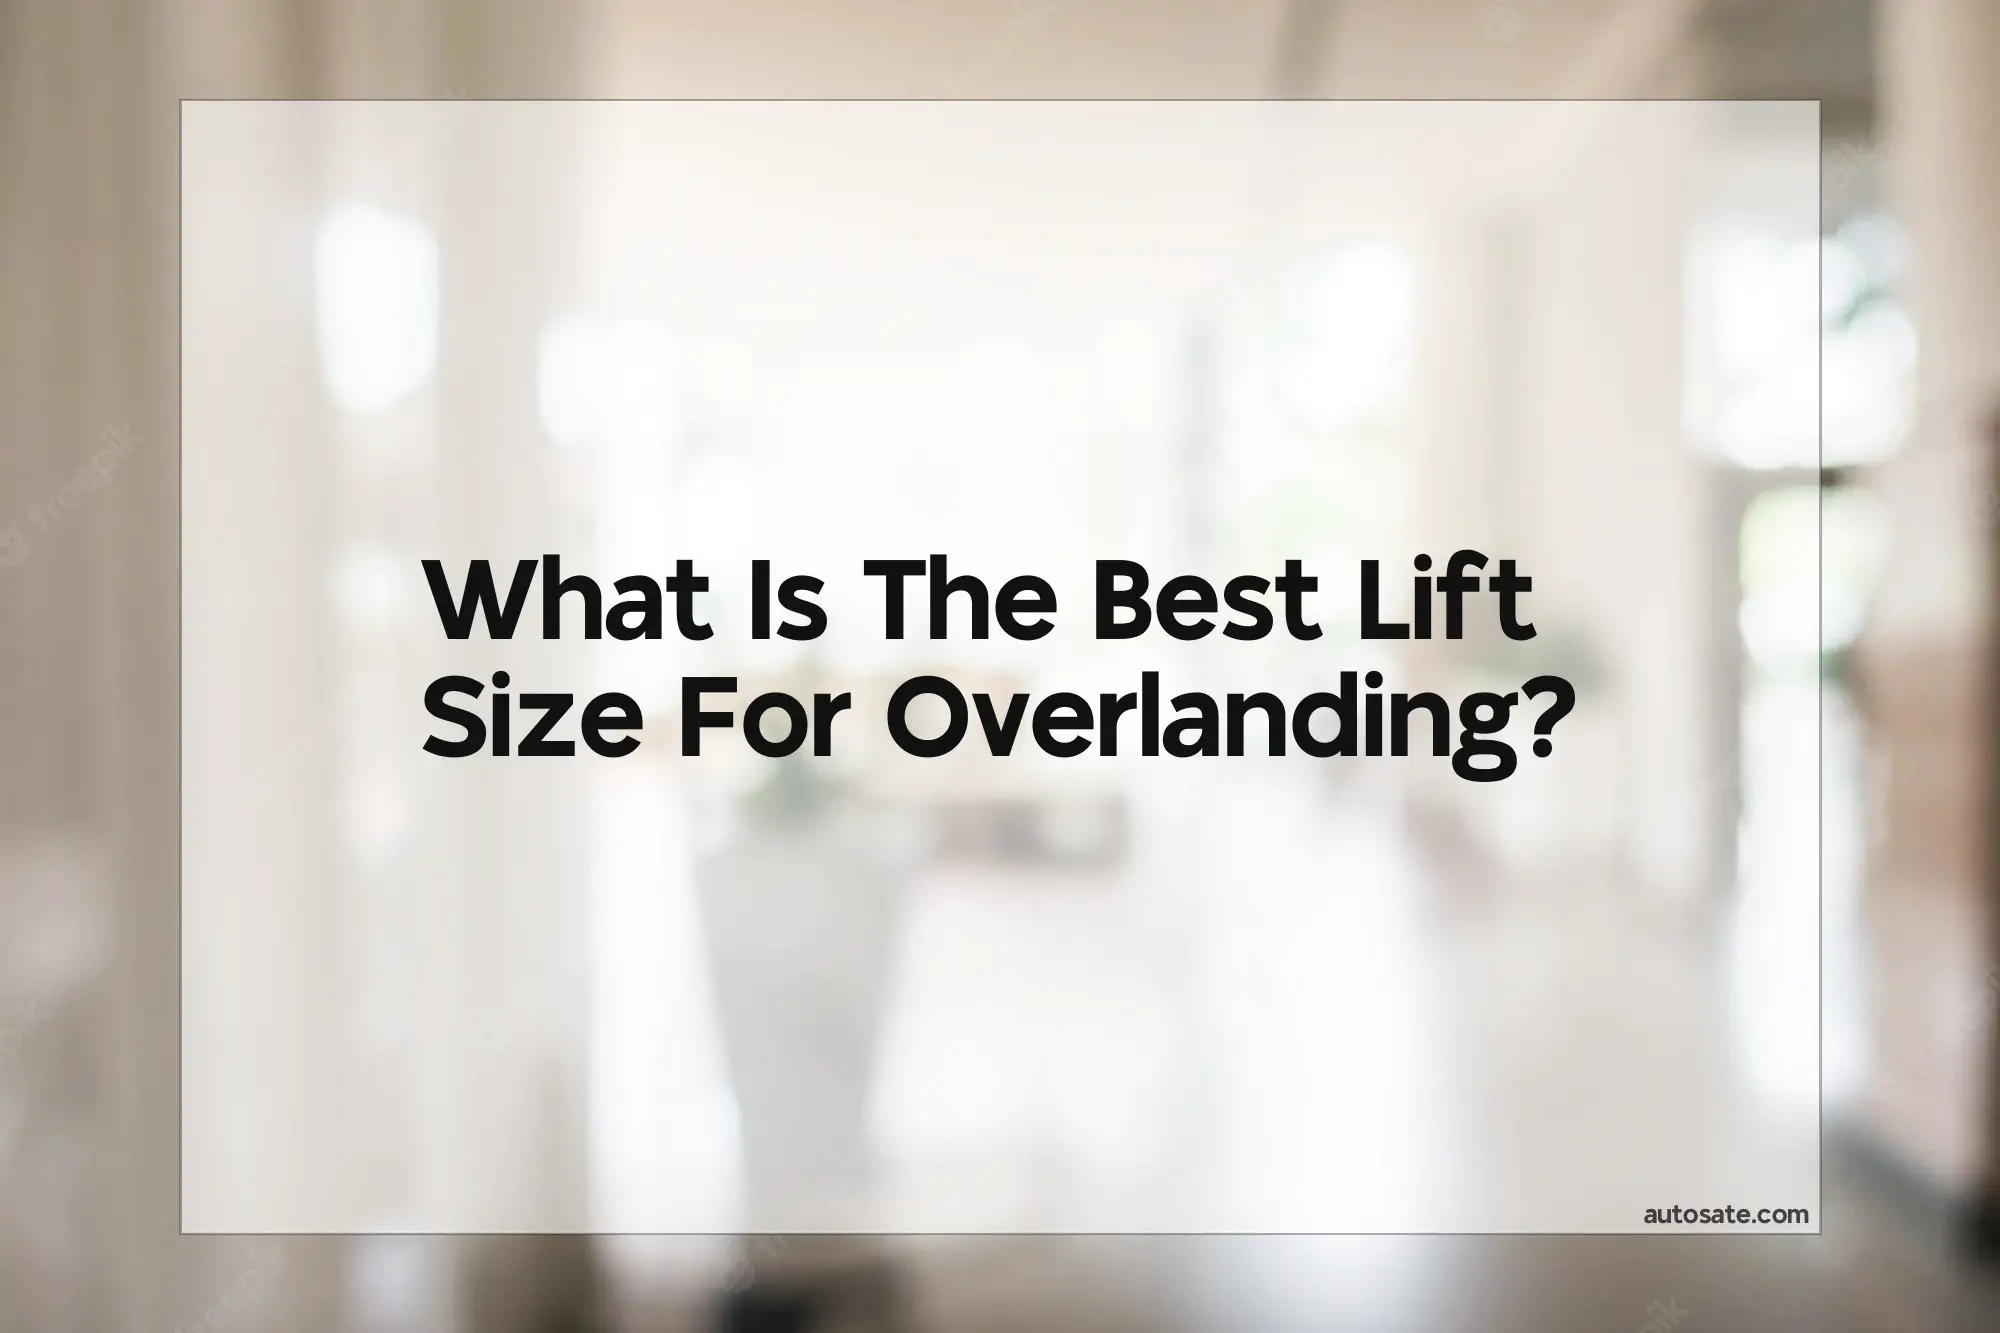 What Is The Best Lift Size For Overlanding